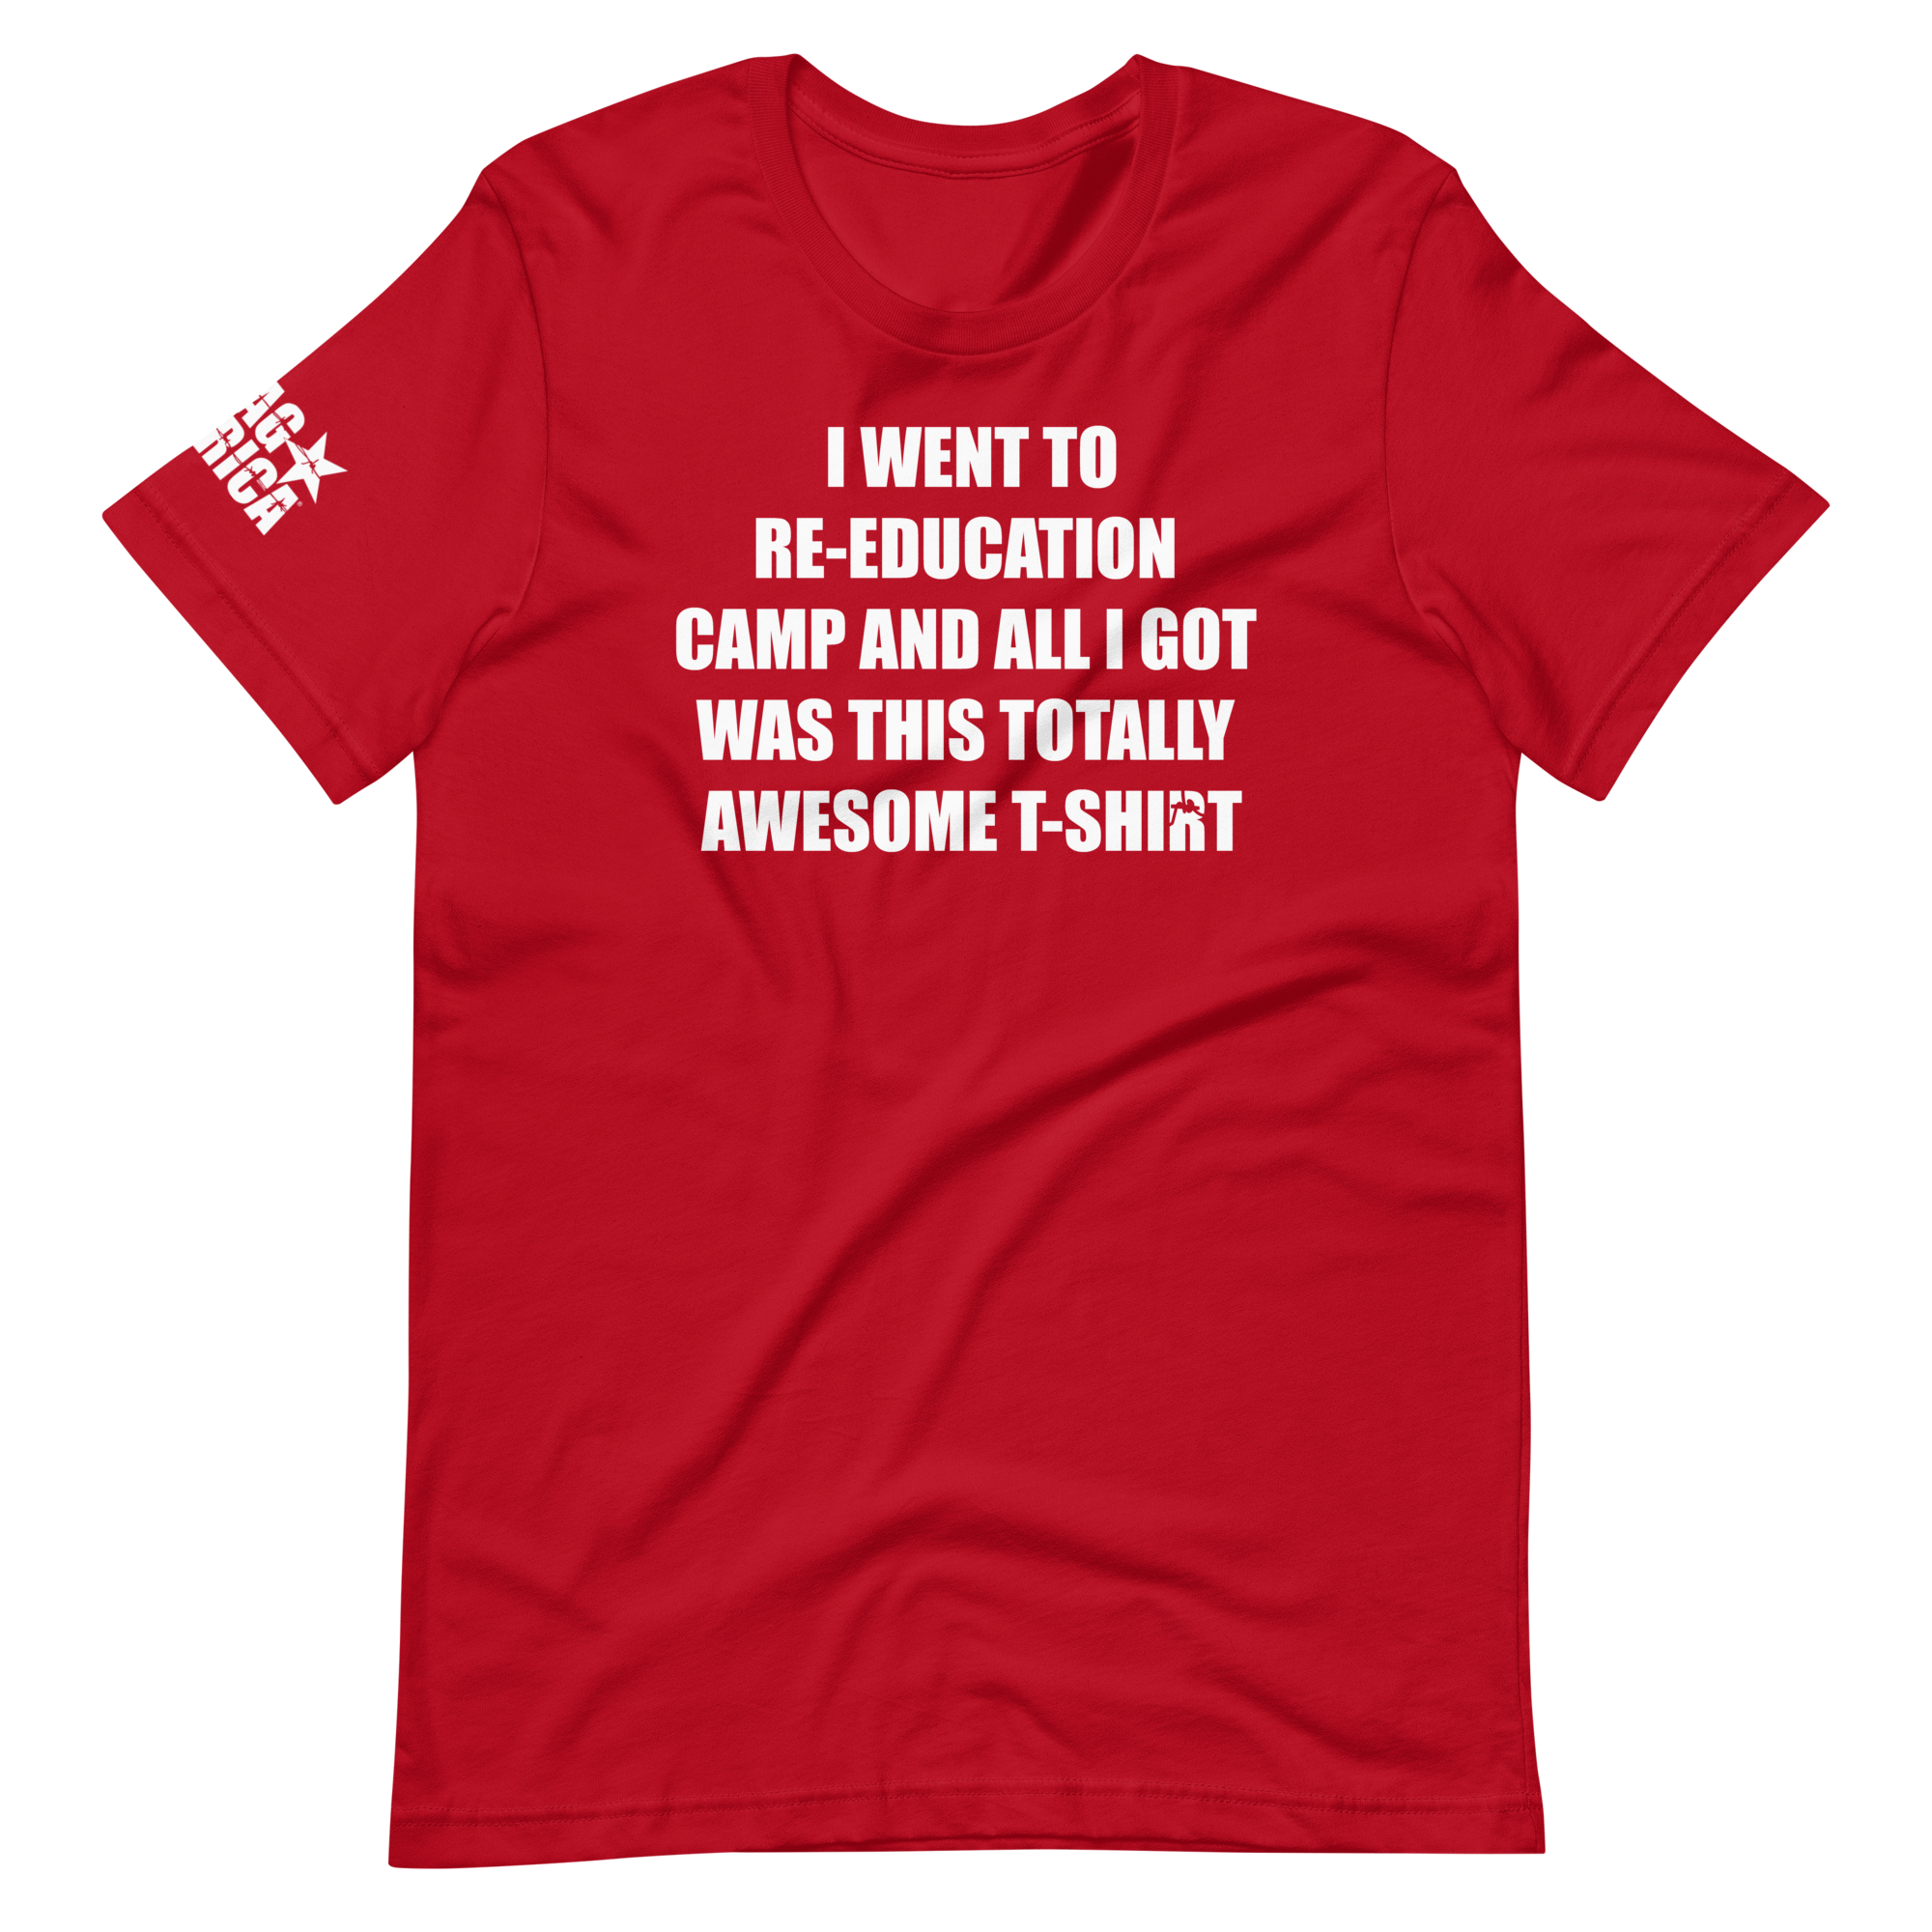 Repellent begin single Totally Awesome T-Shirt - Re-Education Camp Tee Shirt